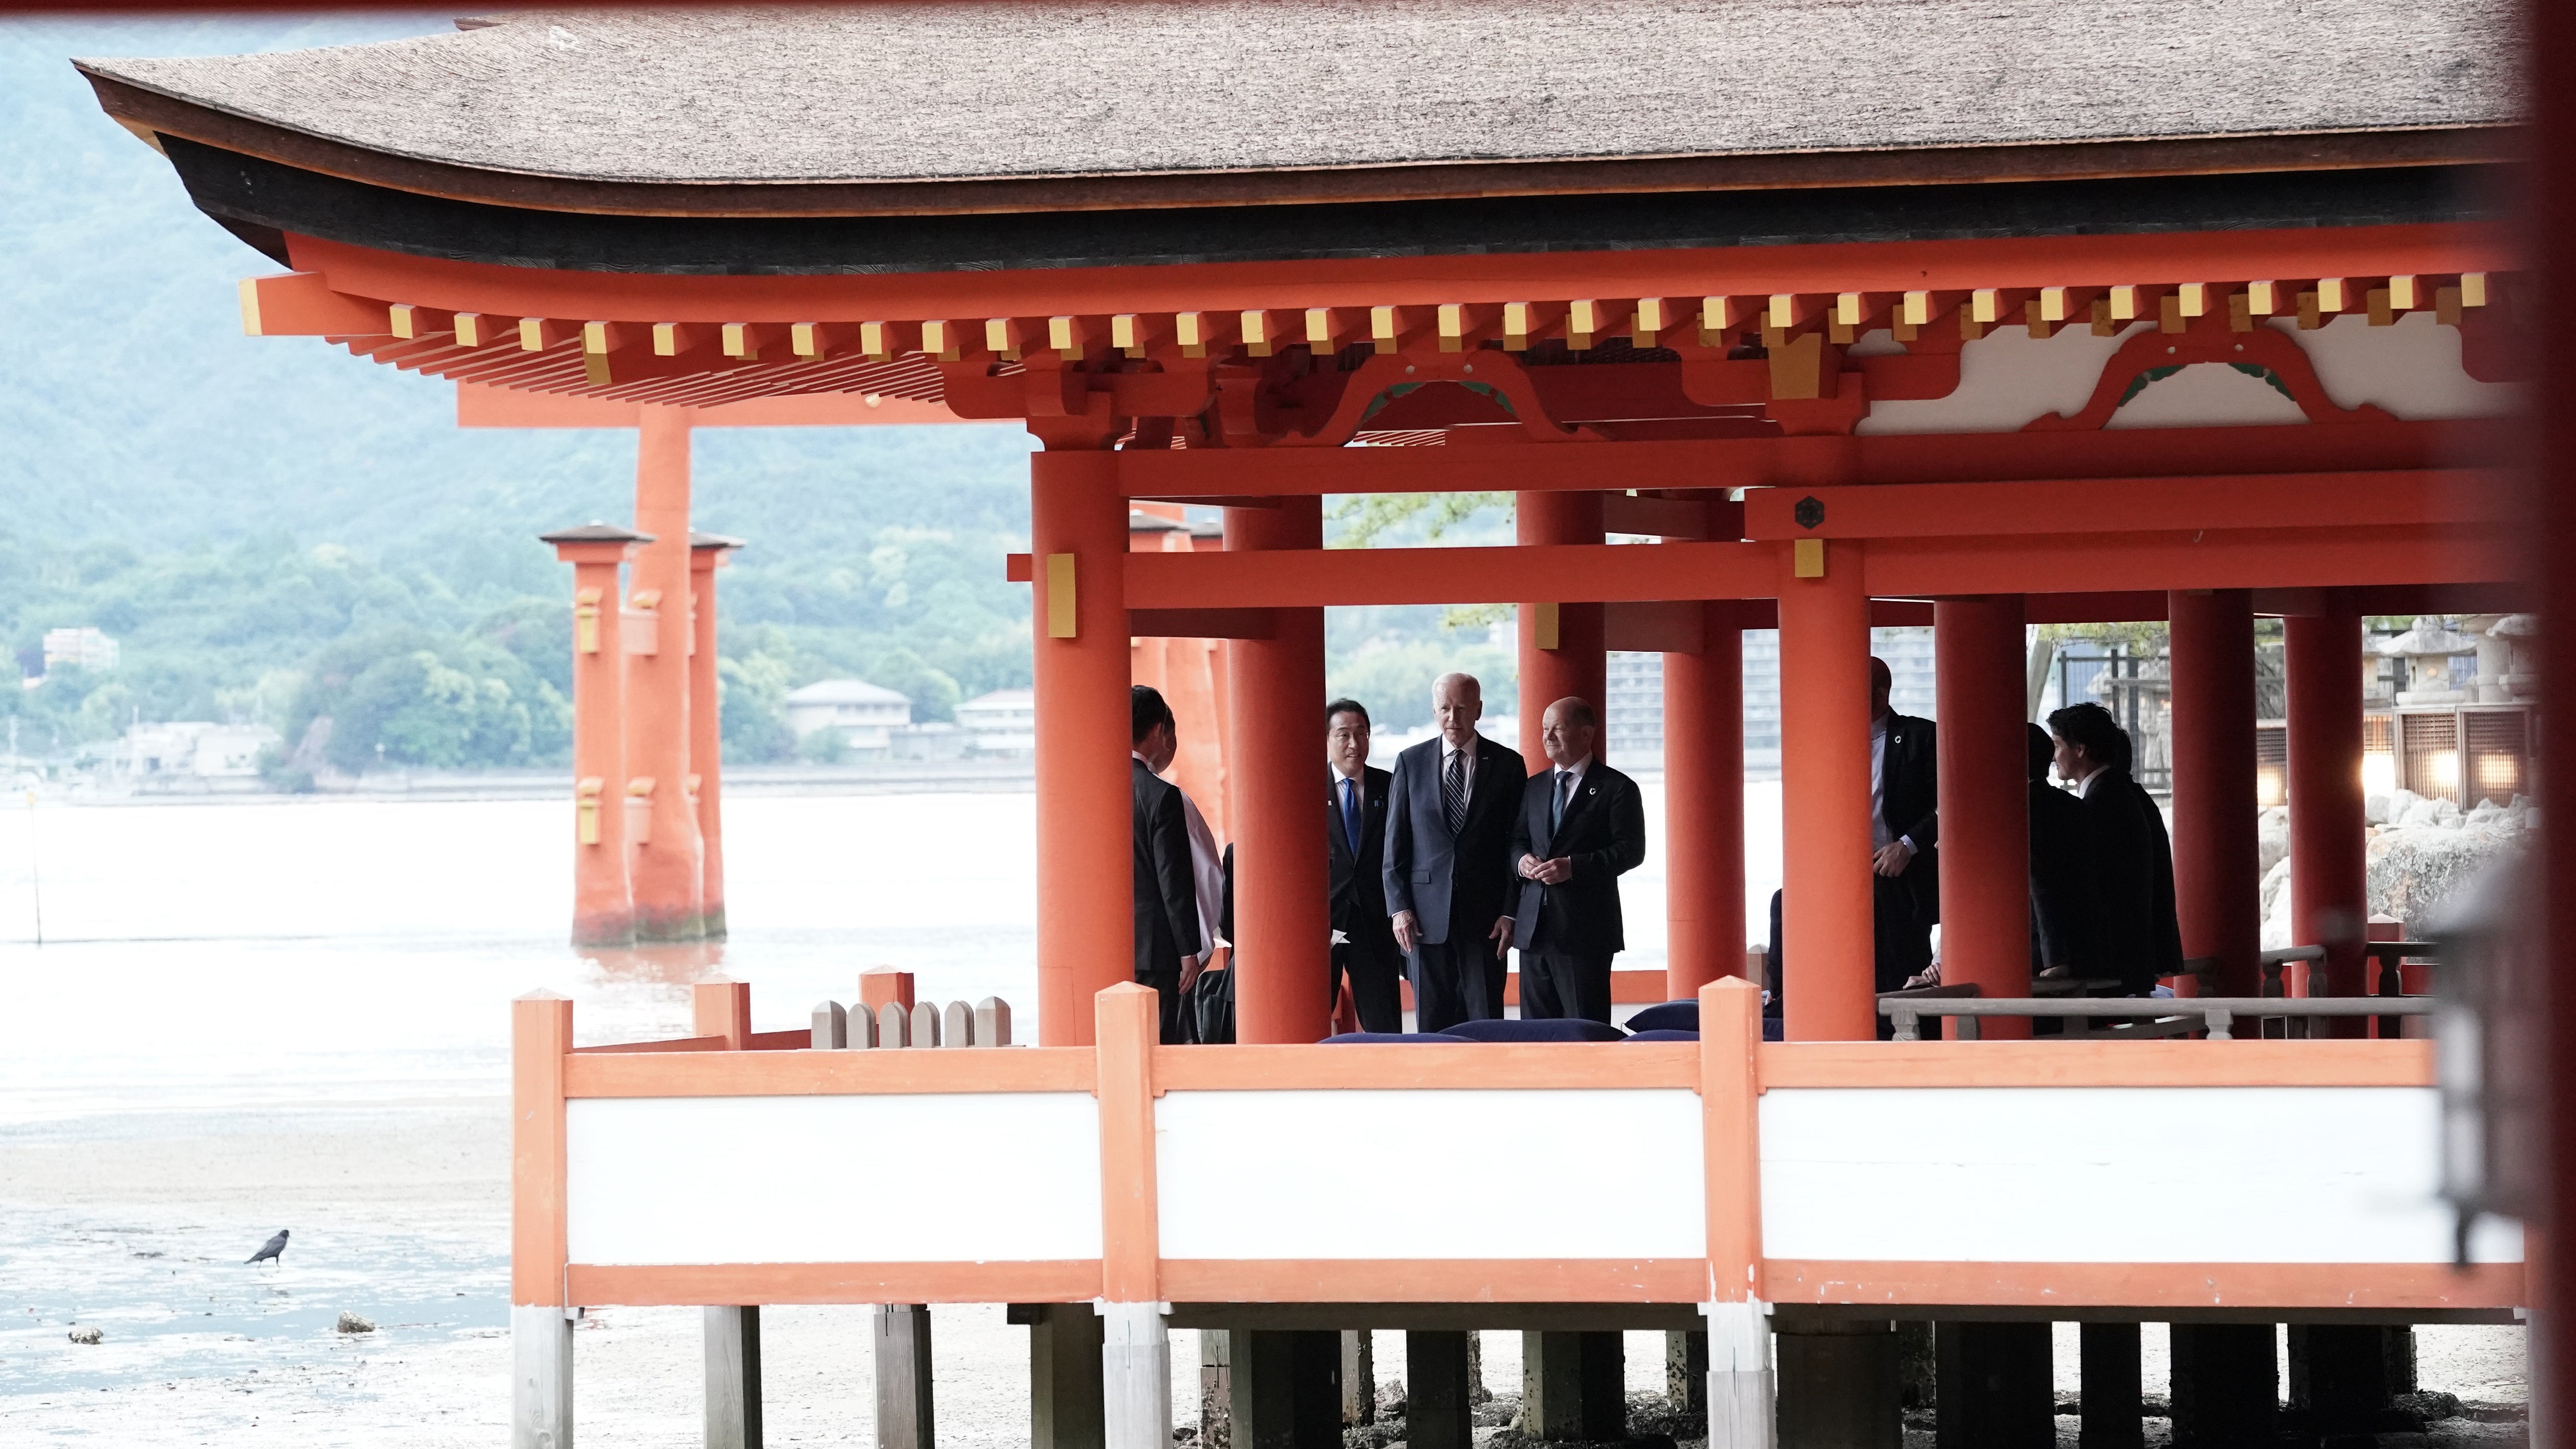 The Finest Japanese Crafts Presented at the G7 Hiroshima Summit